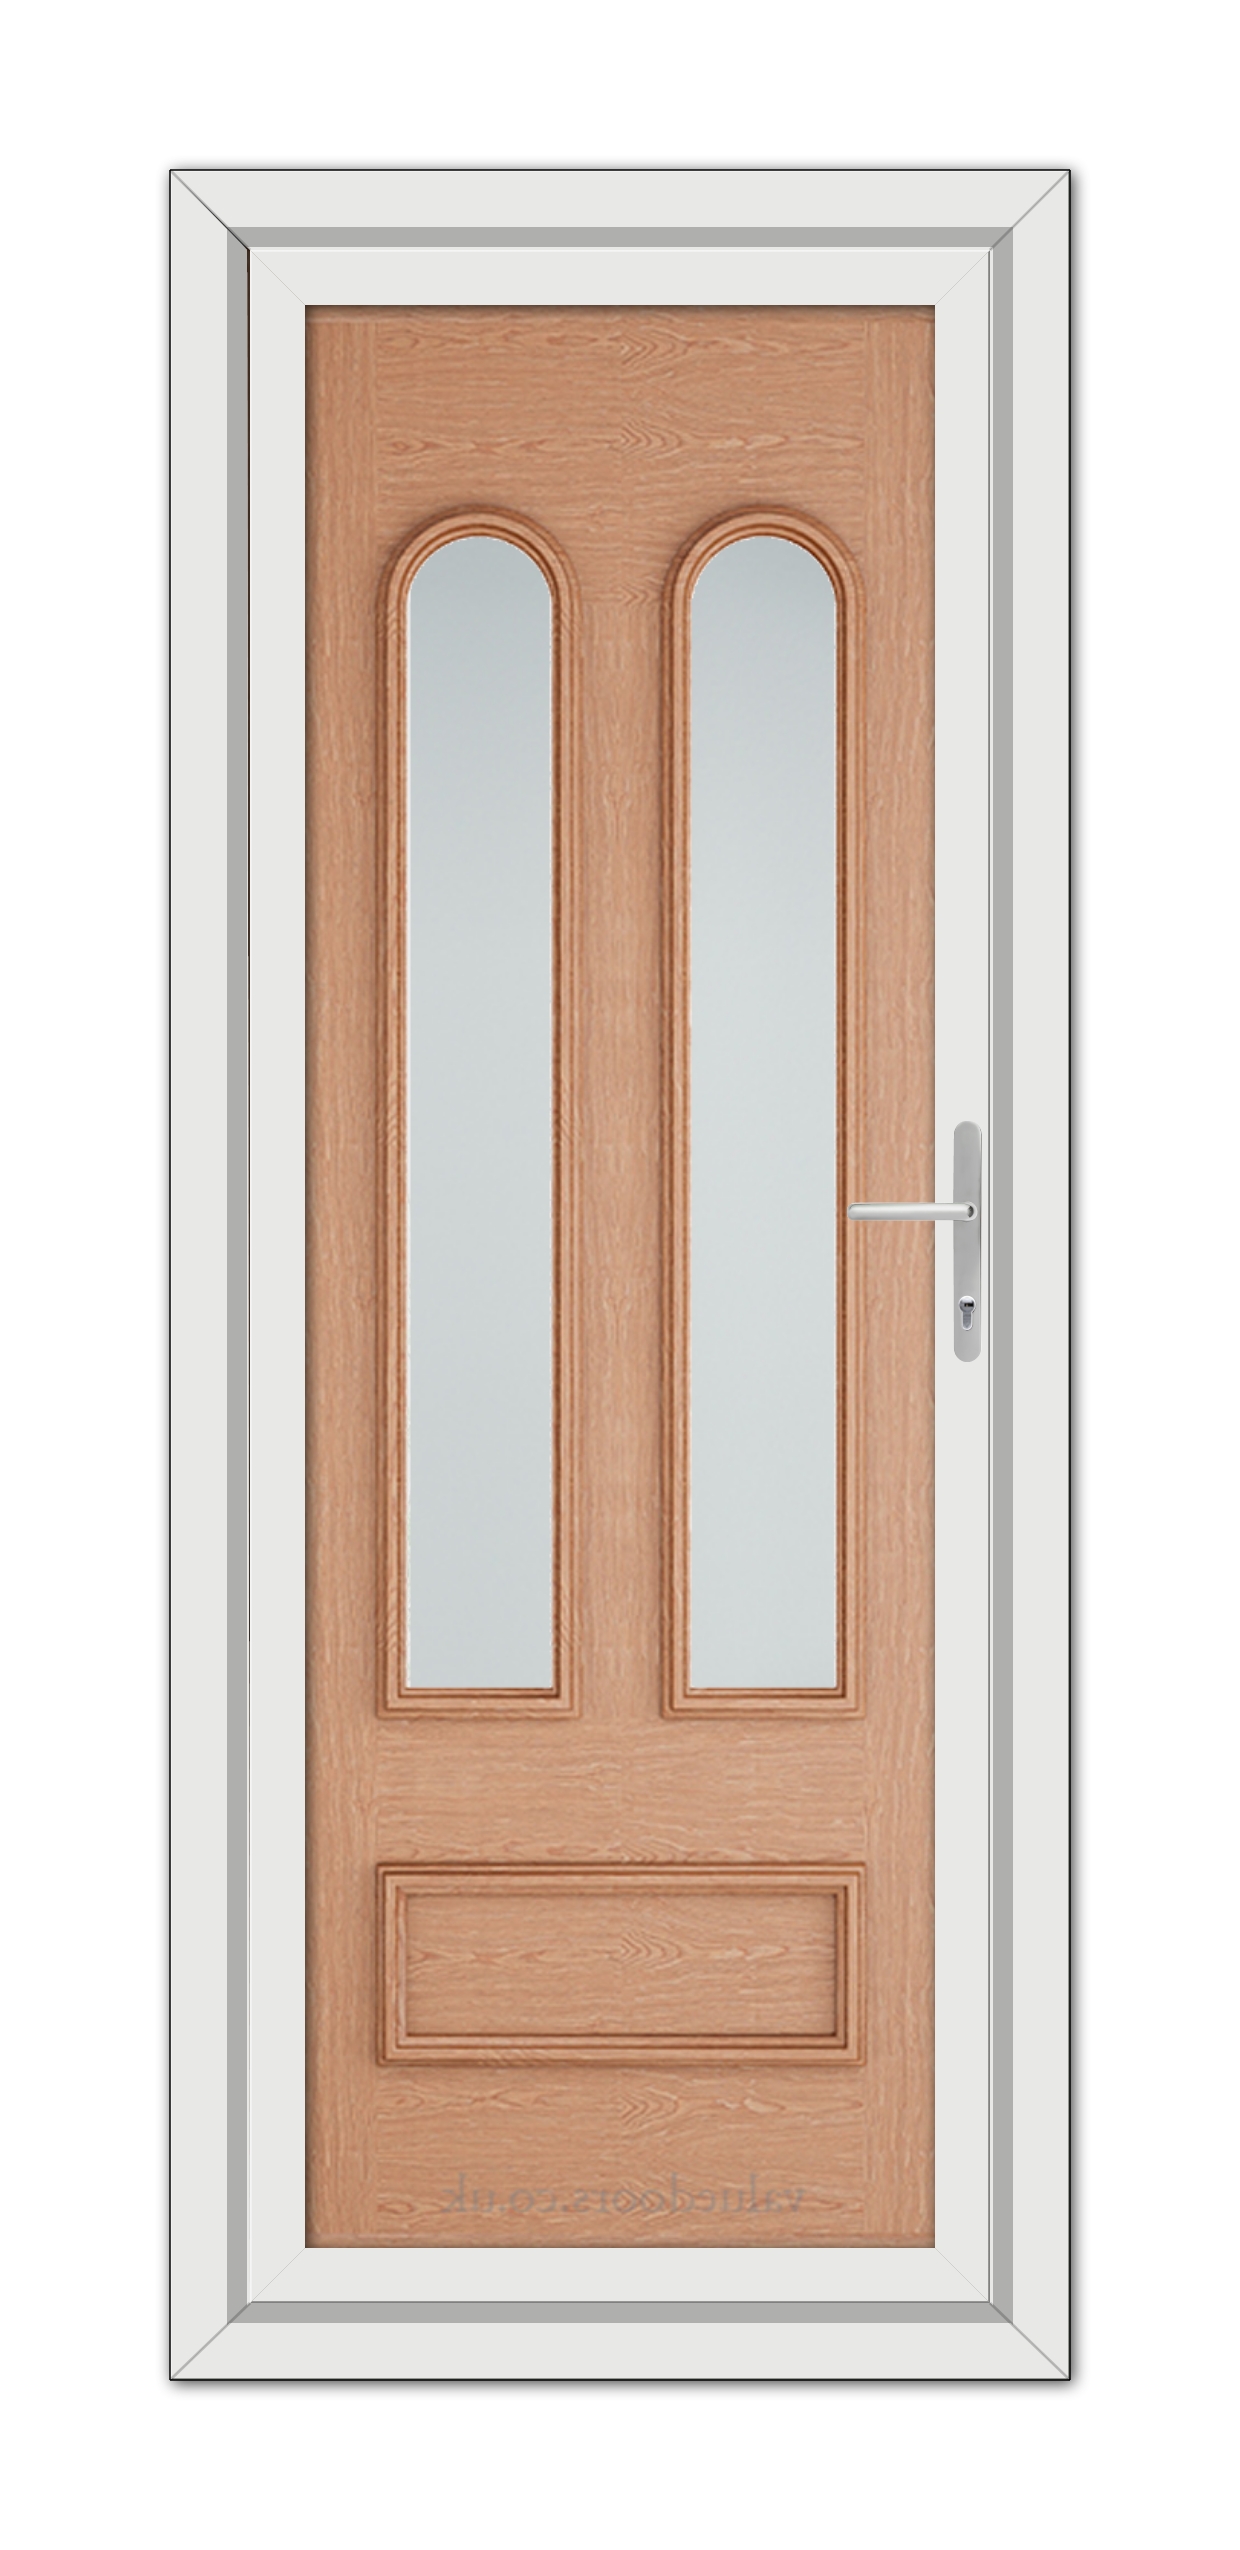 Irish Oak Madrid uPVC door with a white frame, featuring two vertical glass panels and a metal handle.